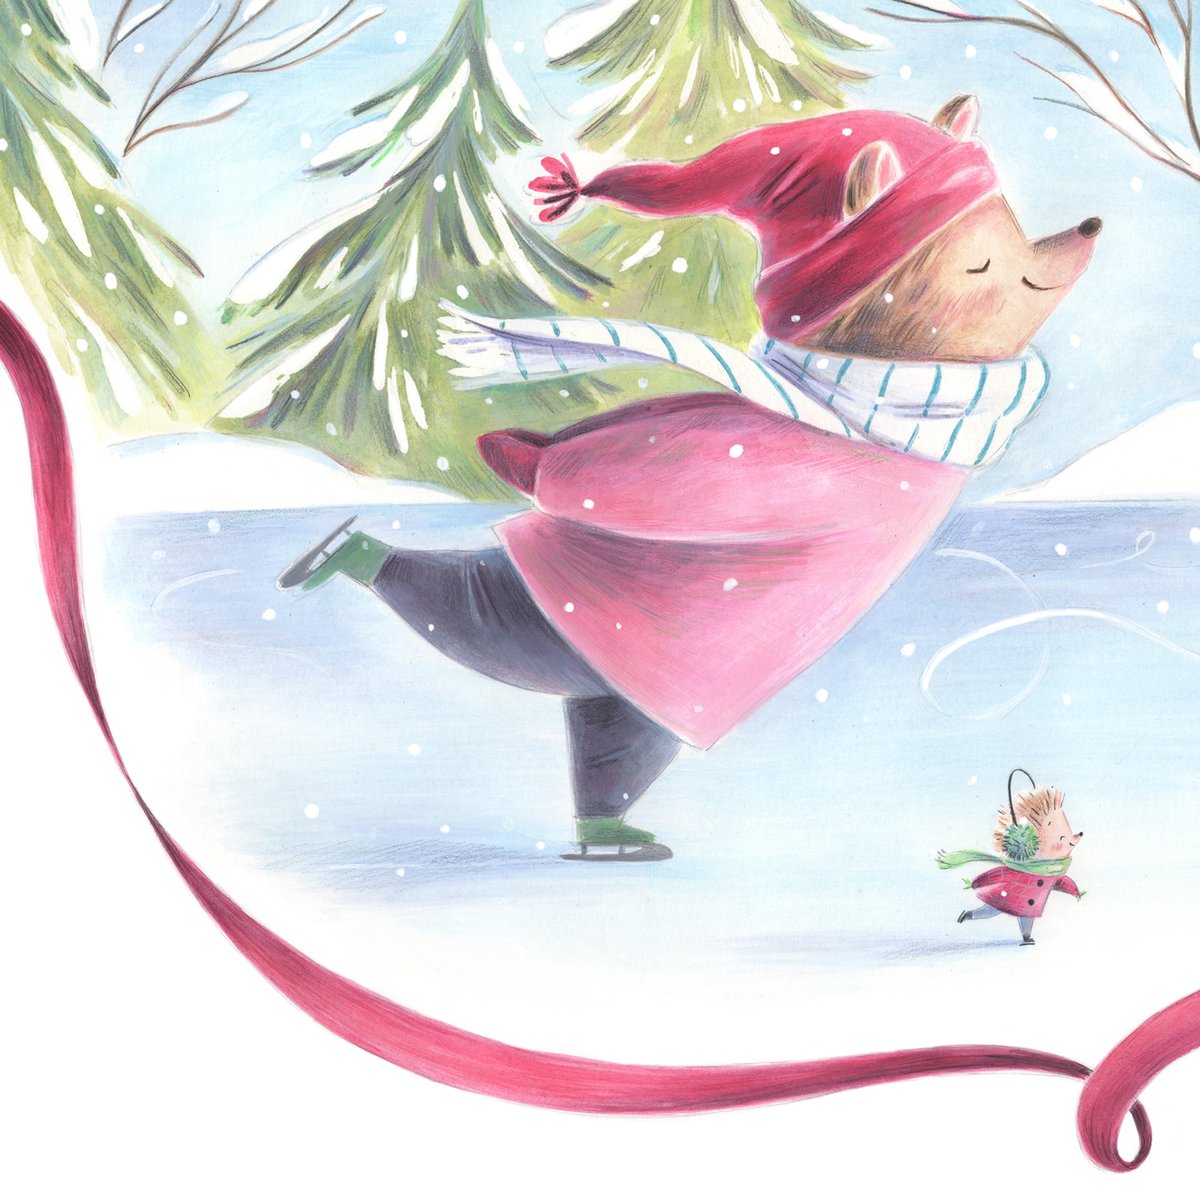 Skating into December with a scene from THE BEST GIFT FOR BEAR. ❄️❤️

#TwoLions #KidLitArtPostcard